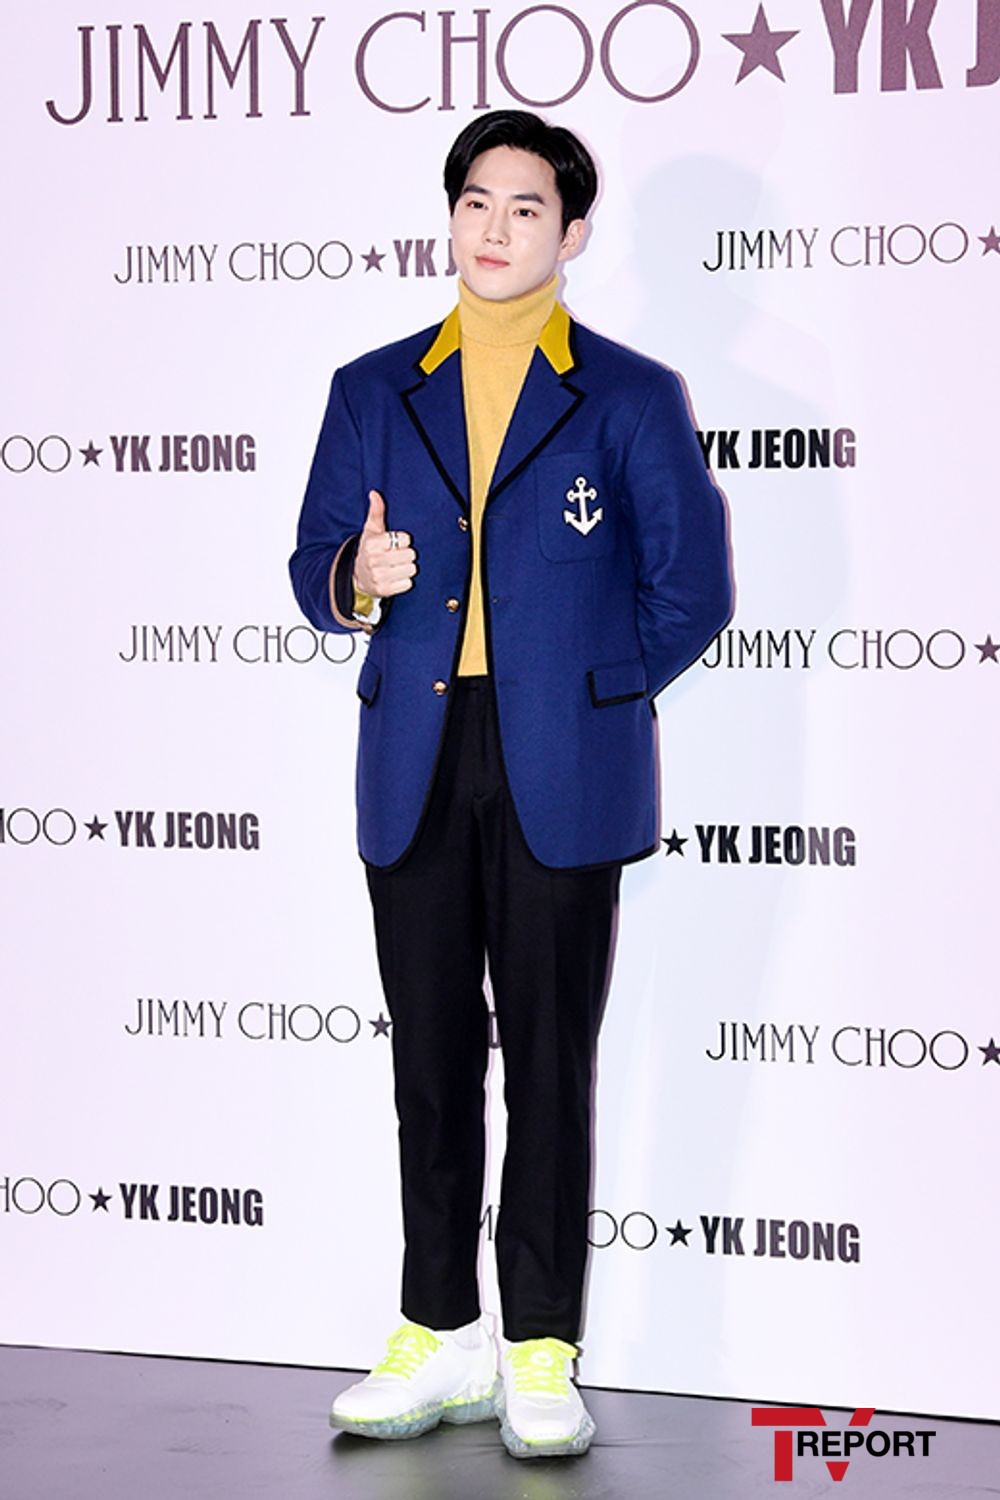 Suho of the group EXO attends an accessory brand event held at the Cheongdam-dong, Seoul Gangnam District on the afternoon of the 9th day and has photo time.